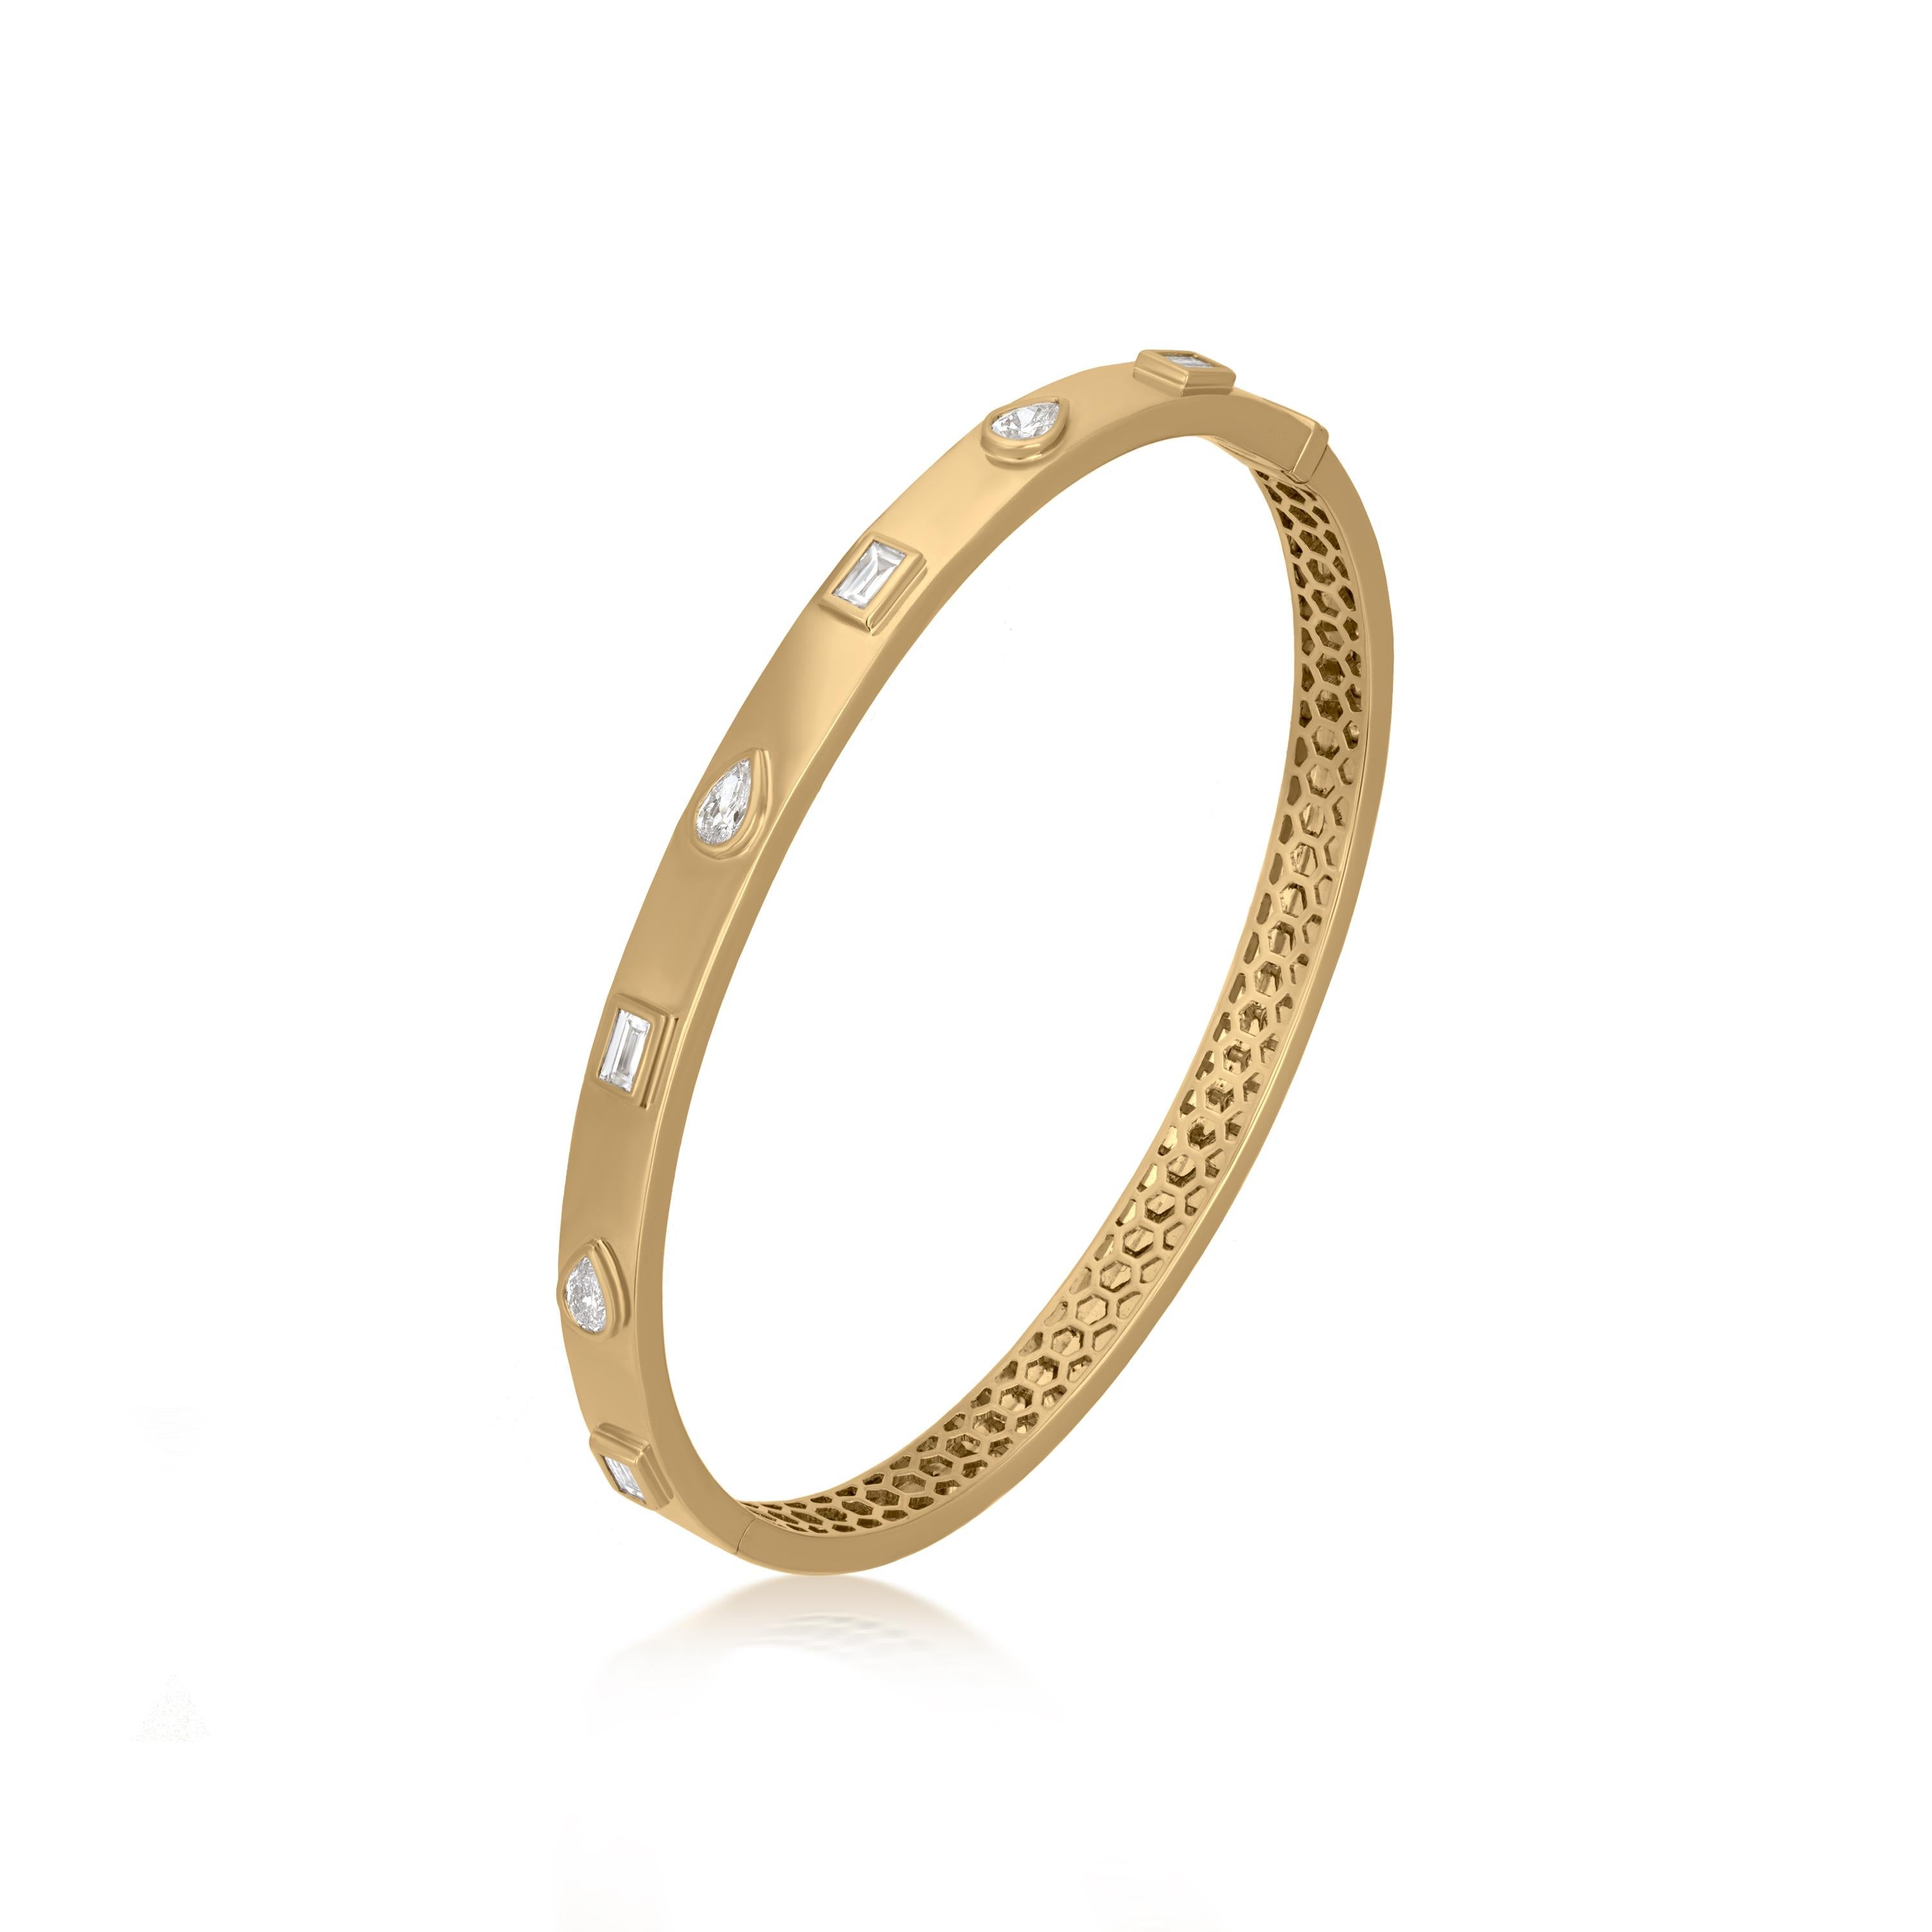 This hinged bangle adds a surreal charm to your wrist. Set in 18K Yellow Gold by Luxle, this modern bangle is gracefully adorned with baguette and pear-shaped full-cut shining white diamonds in a bezel setting. The diamonds weigh 0.76 cwt, making